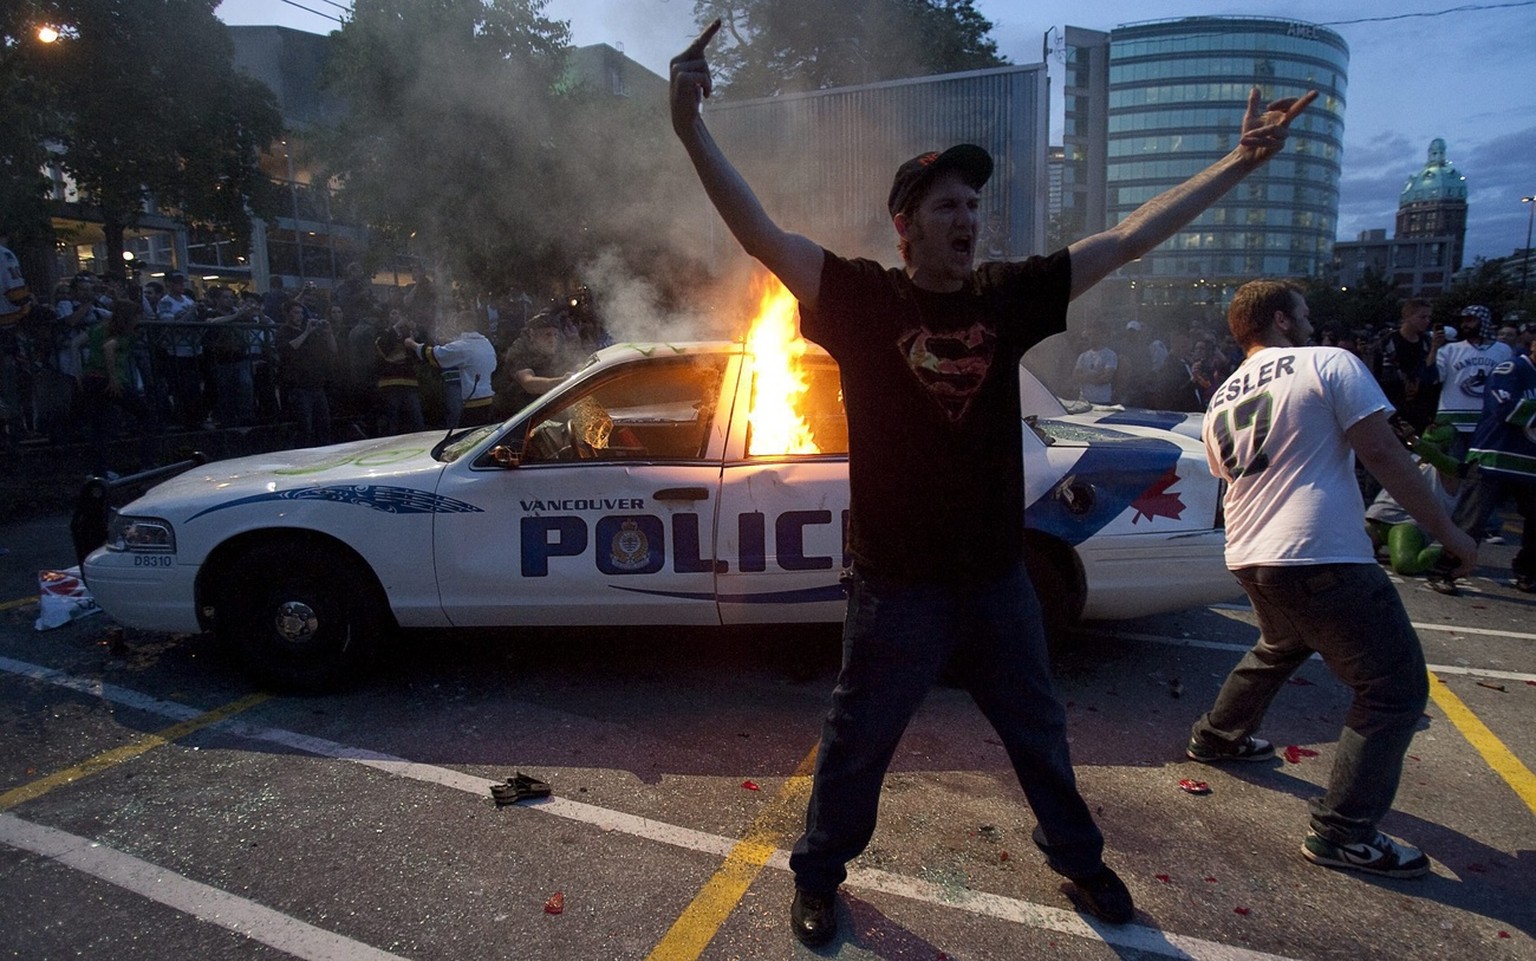 A police car burns during a riot in downtown Vancouver, British Columbia Wednesday, June 15, 2011 following the Vancouver Canucks 4-0 loss to the Boston Bruins in game 7 of the Stanley Cup hockey fina ...